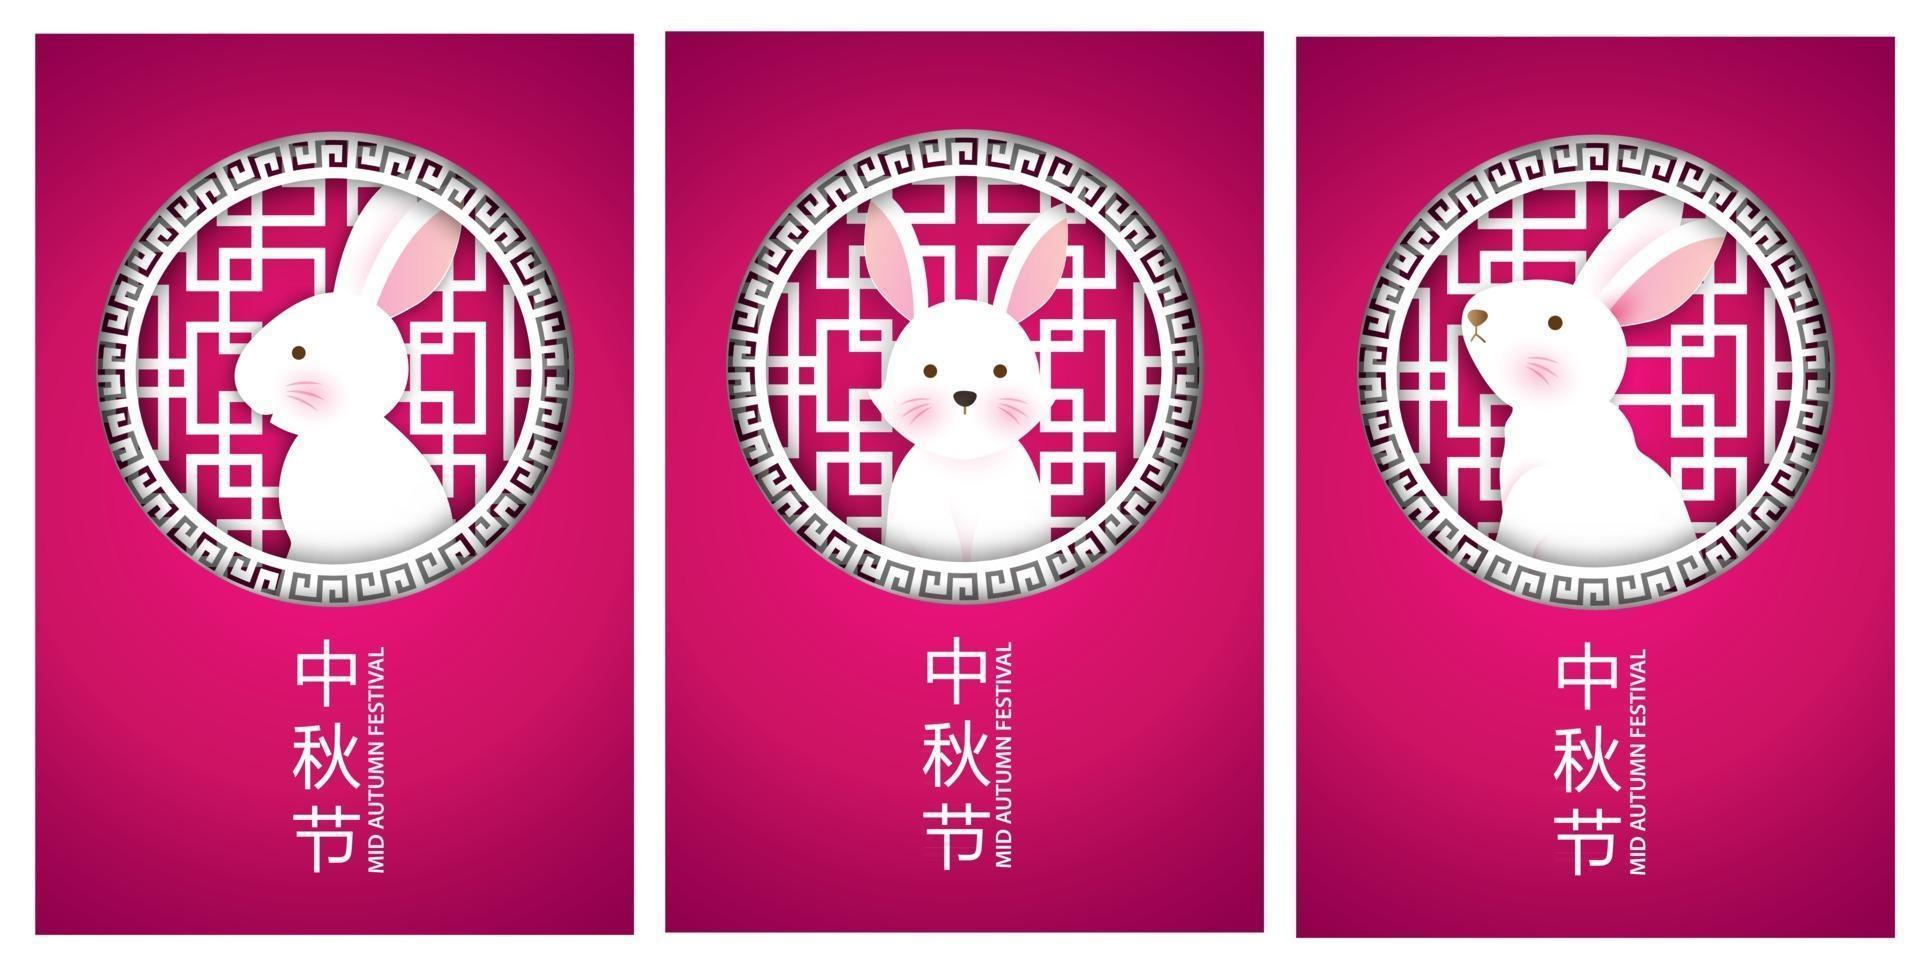 Mid autumn festival banner and card in papercut style vector